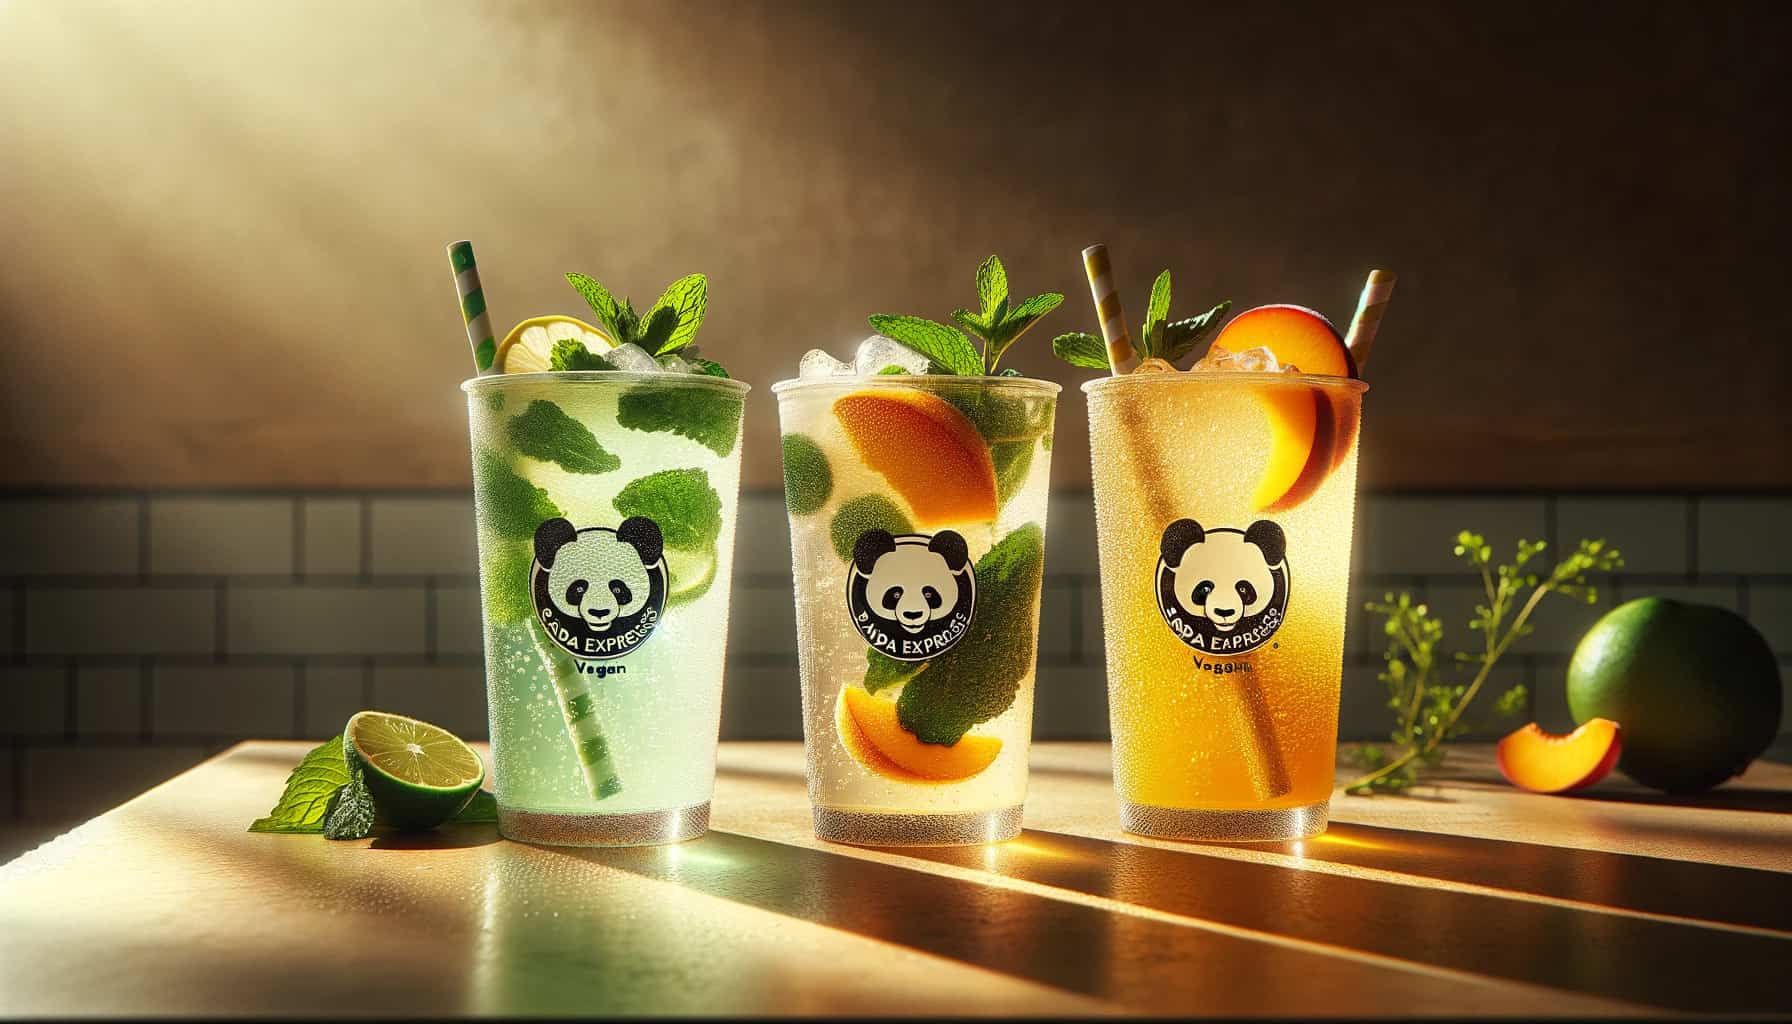 Panda express vegan drinks on a wooden counter. The drinks include a sparkling mint limeade with a sprig of mint on top, a fresh peach iced tea with peach slices floating, and a golden turmeric lemonade glistening with condensation.